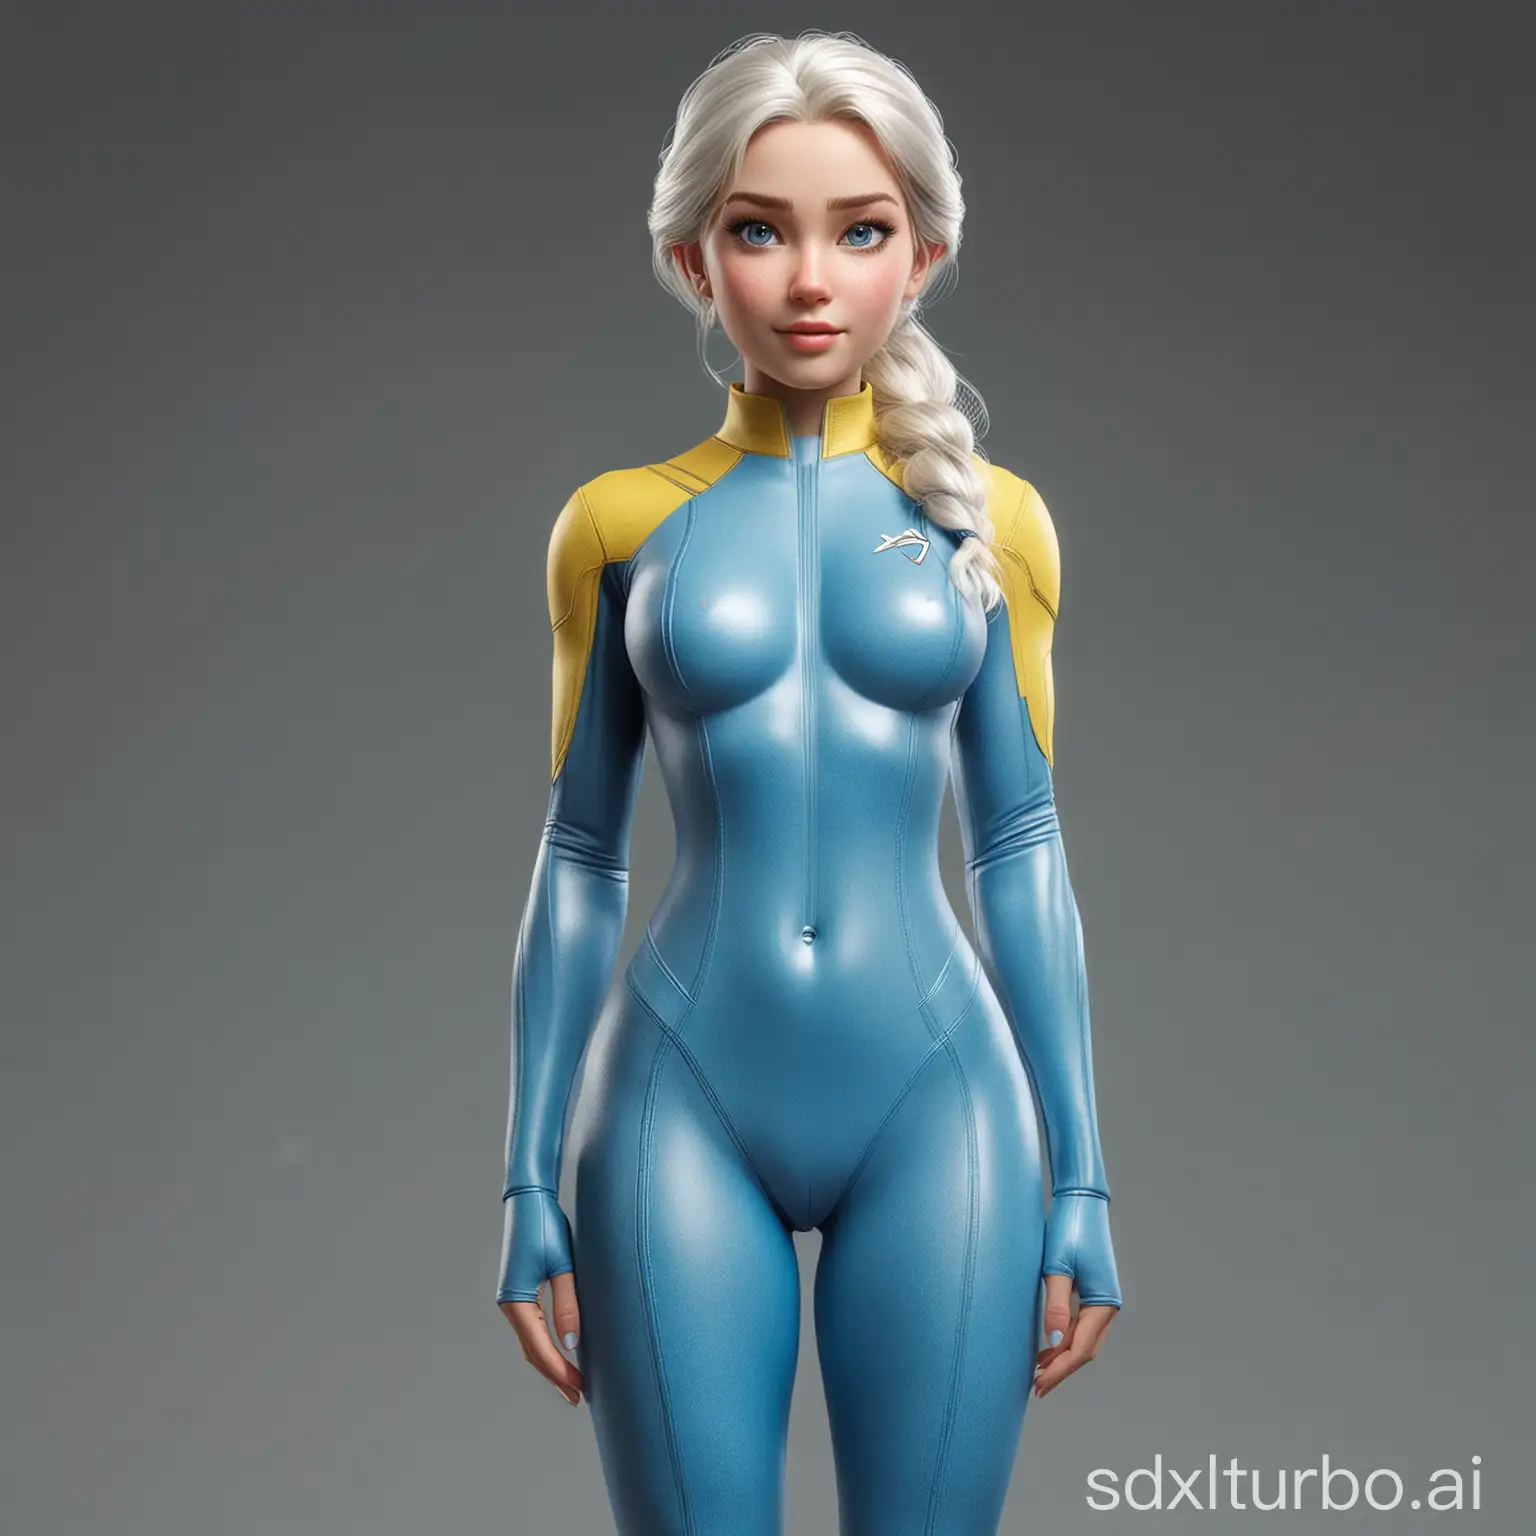 Realistic-Elsa-in-XMen-Tight-Uniform-Tall-Sexy-Woman-with-Muscular-Legs